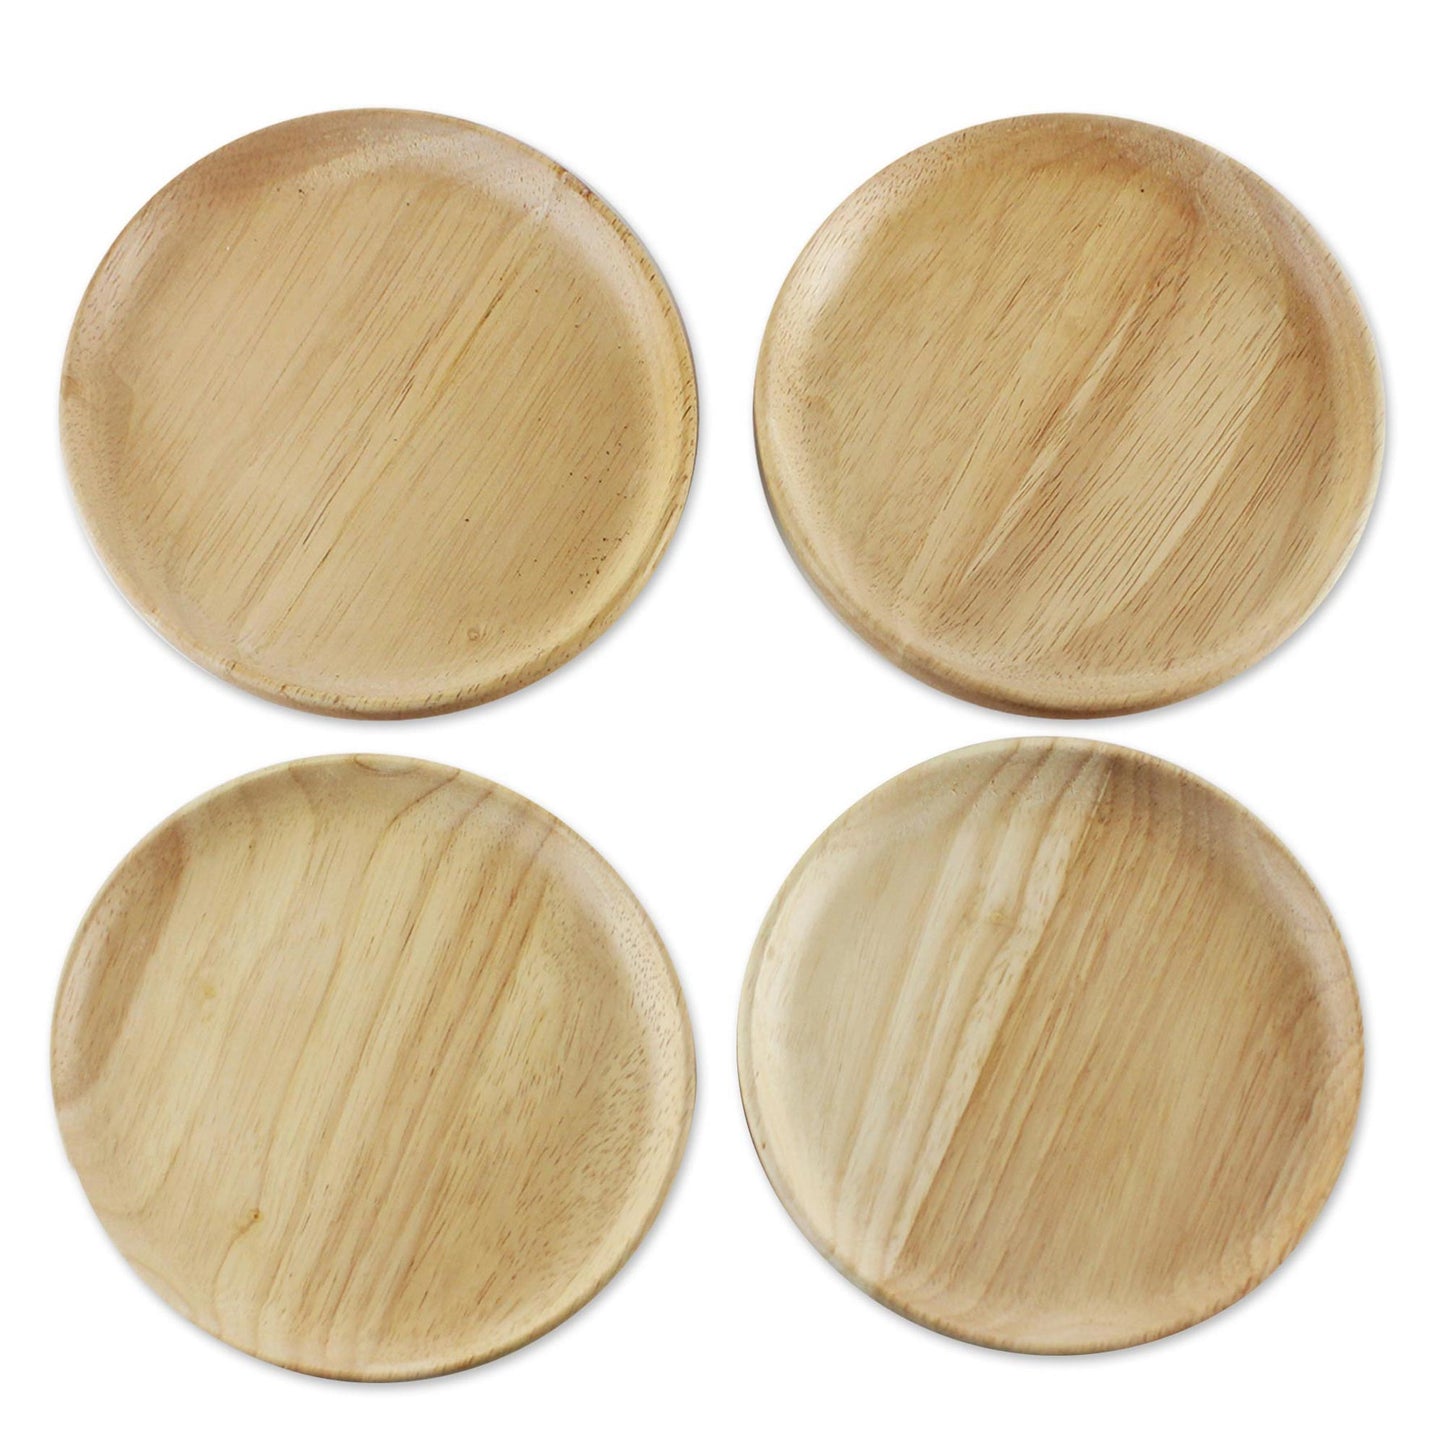 Sweet Party Four Rubberwood Dessert or Party Plates from Thailand